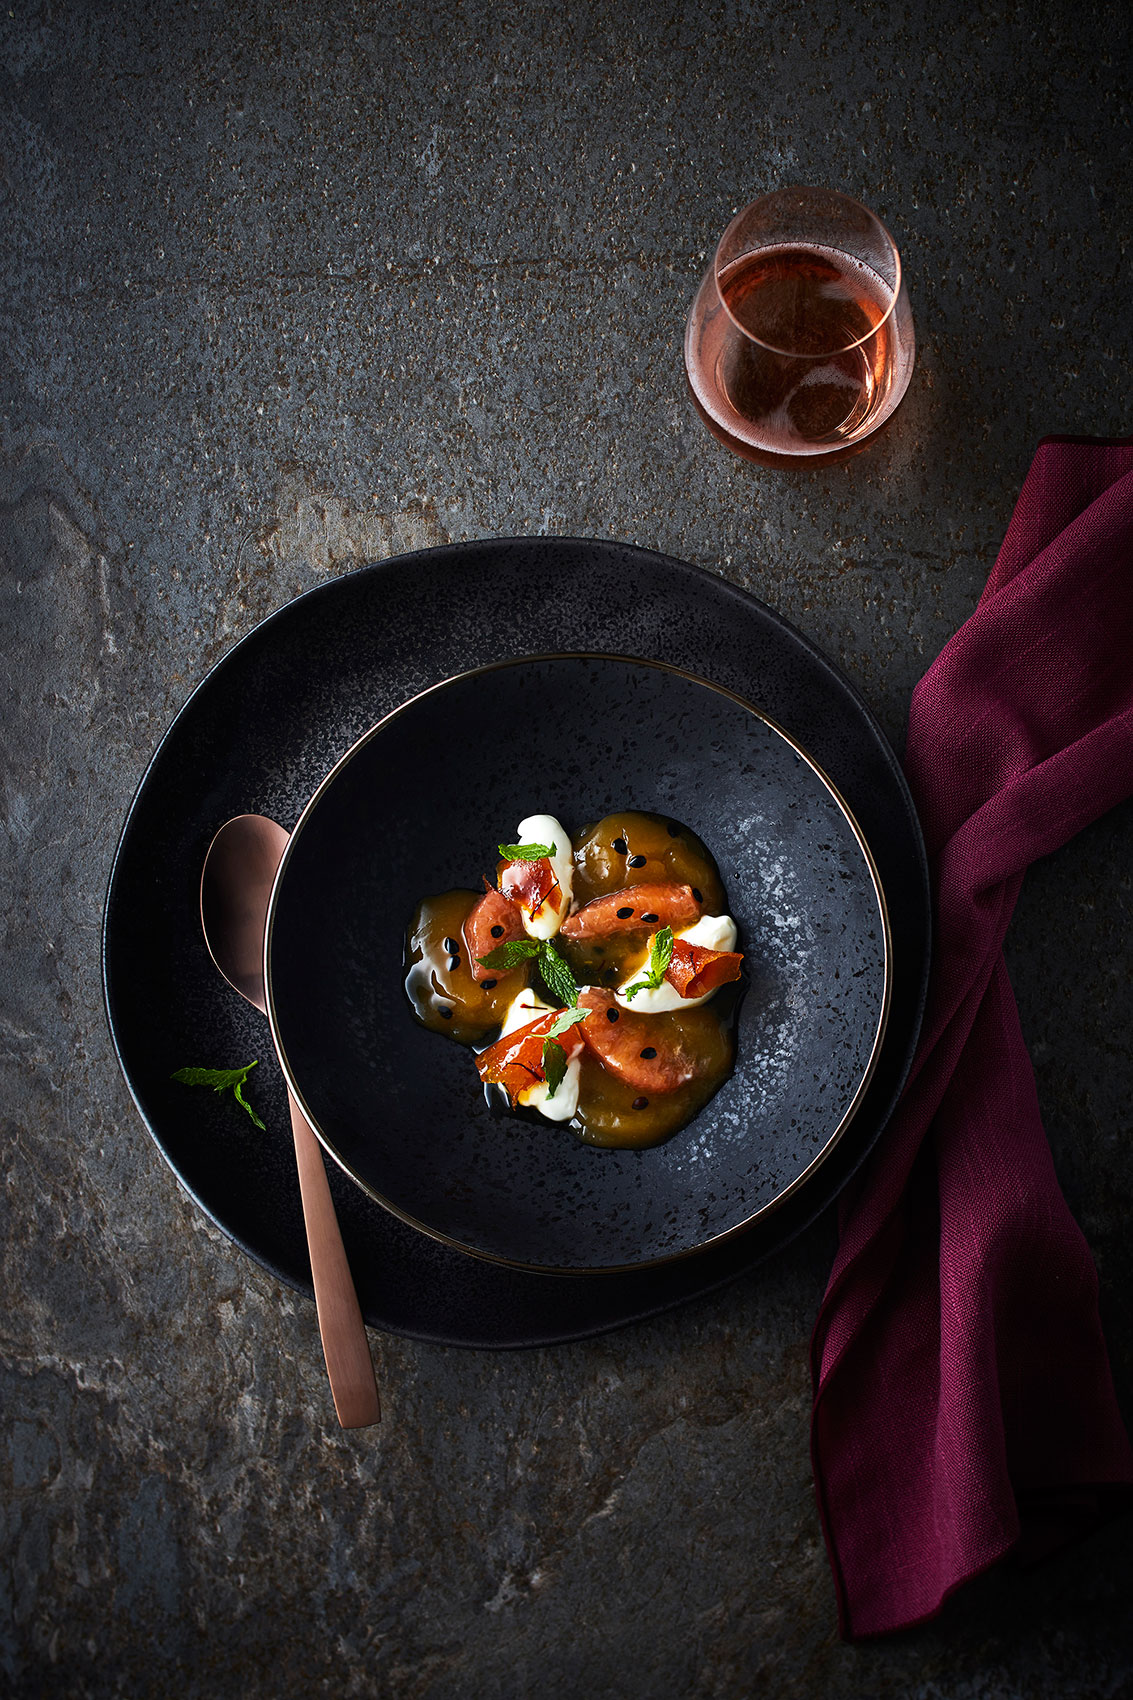 Grapefruit Jelly with Red Wine • Advertising & Editorial Food Photography